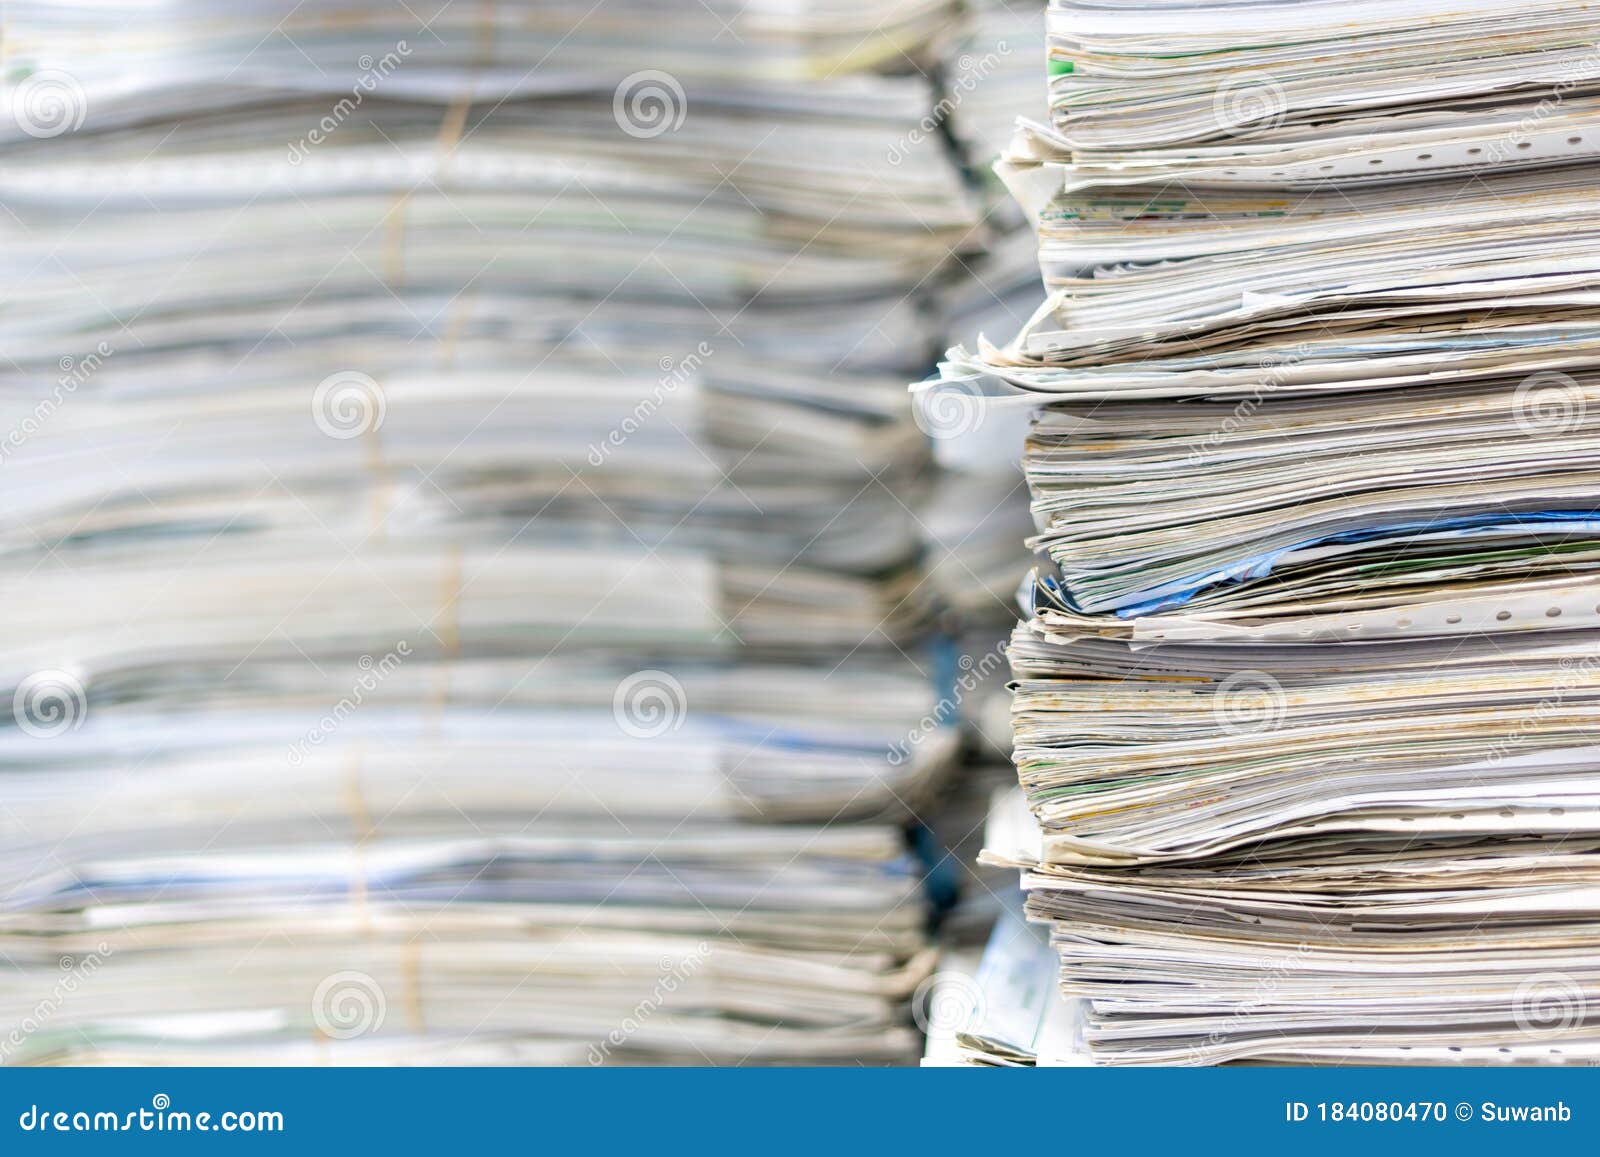 stacks of paper files work desk office, business report papers,piles of unfinished documents achieves